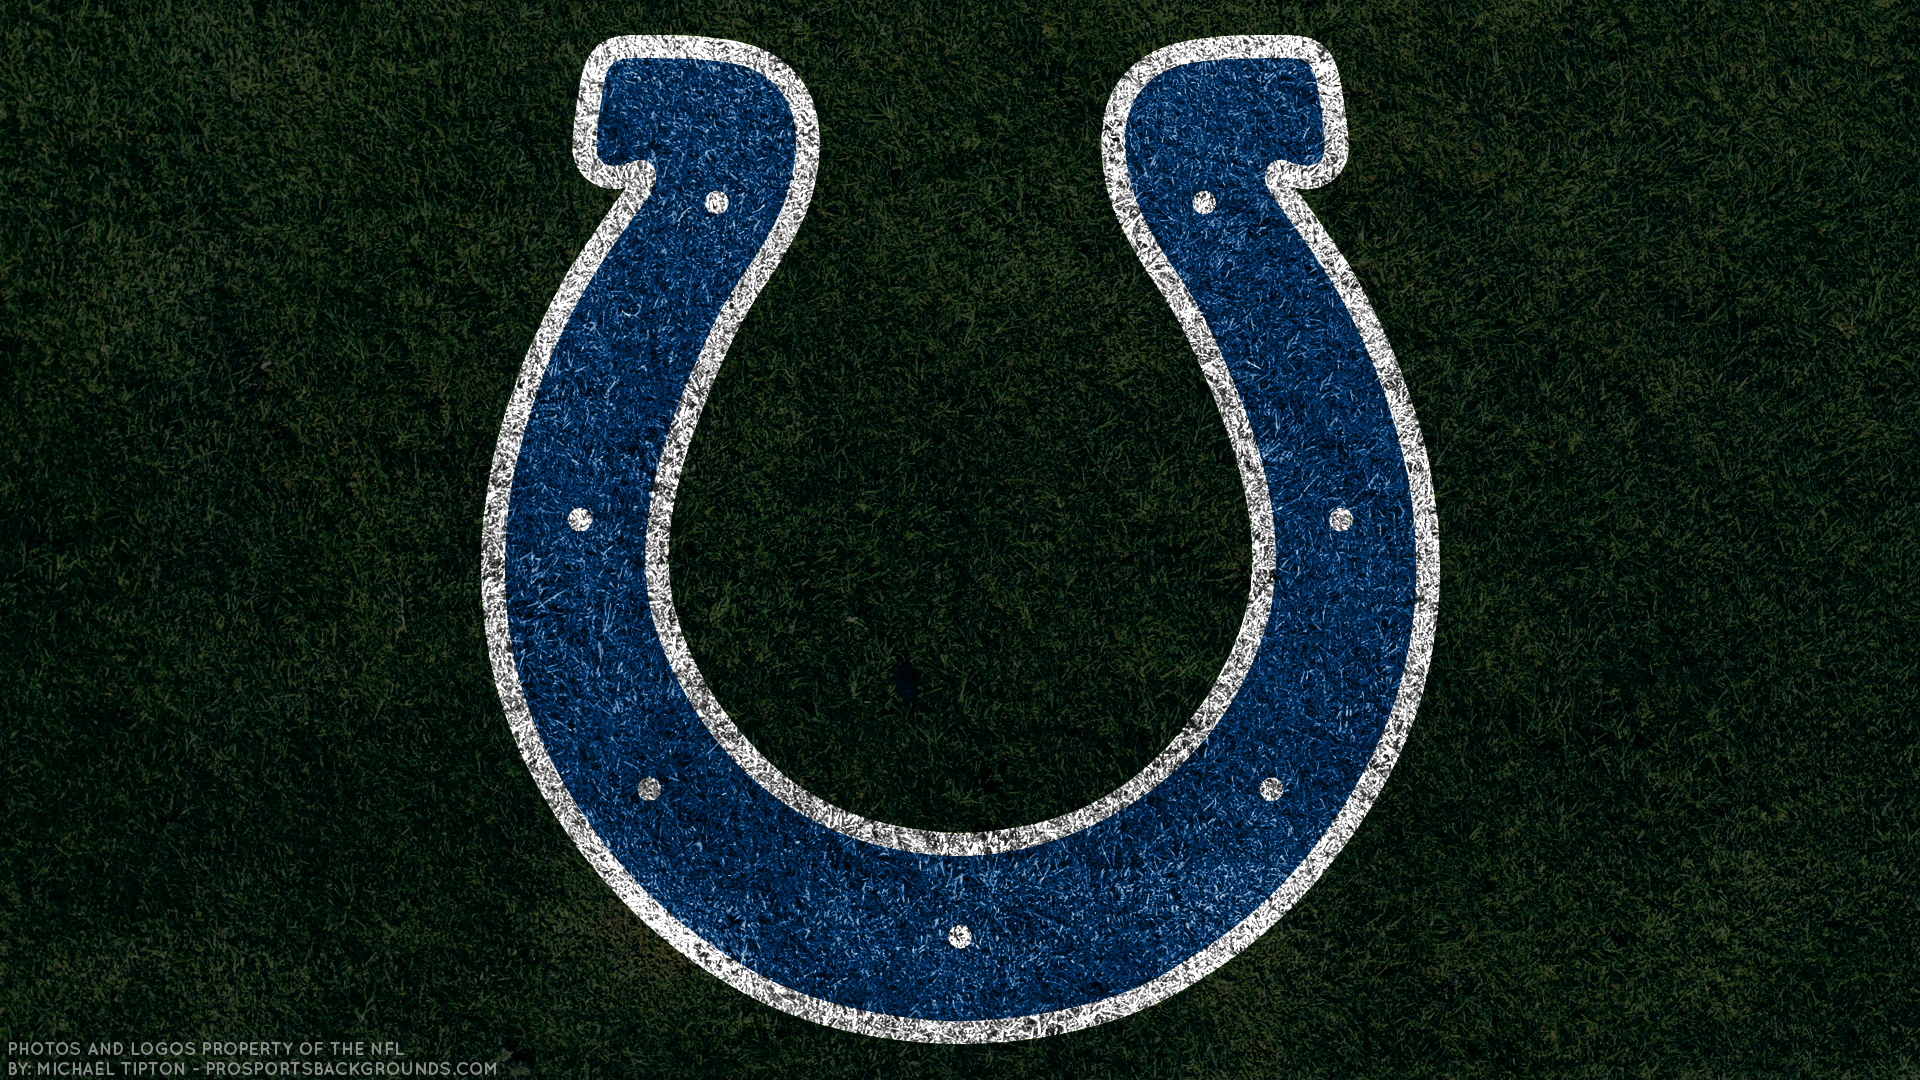 indianapolis-colts-2018-wallpapers-wallpaper-cave